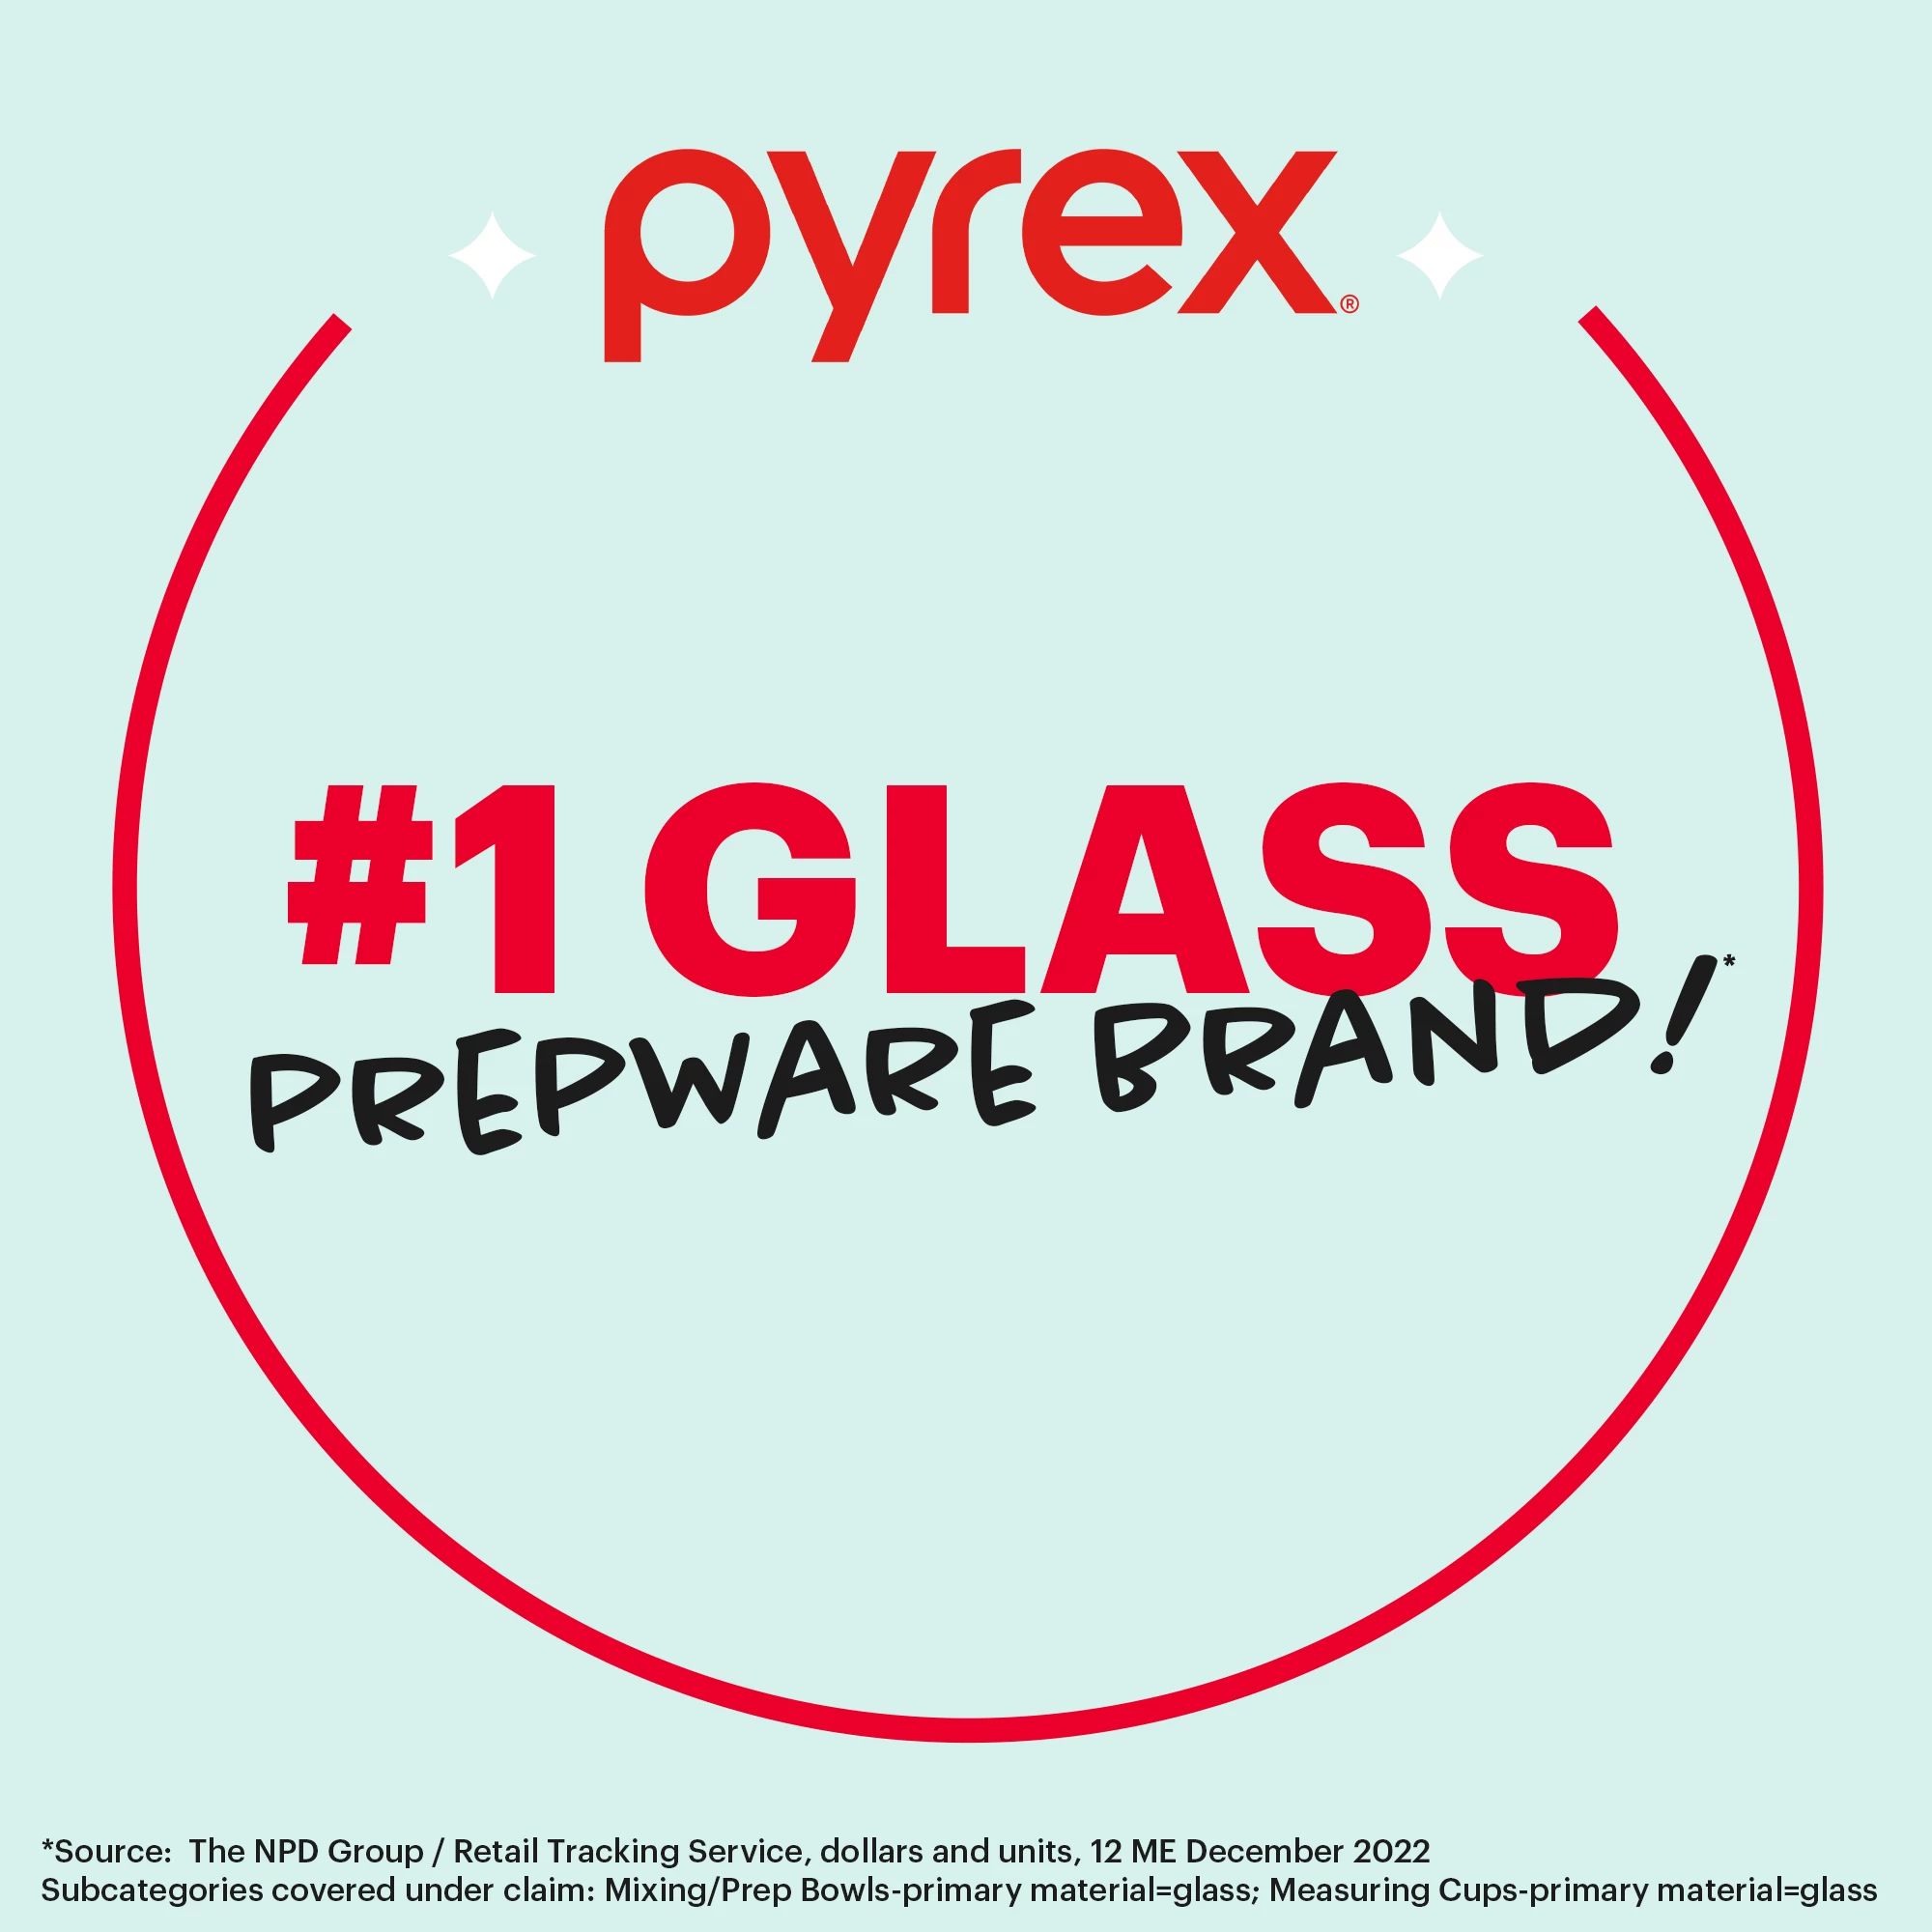 Pyrex Smart Essentials Glass Mixing Bowl - Clear/Blue, 2.5 qt - Fred Meyer